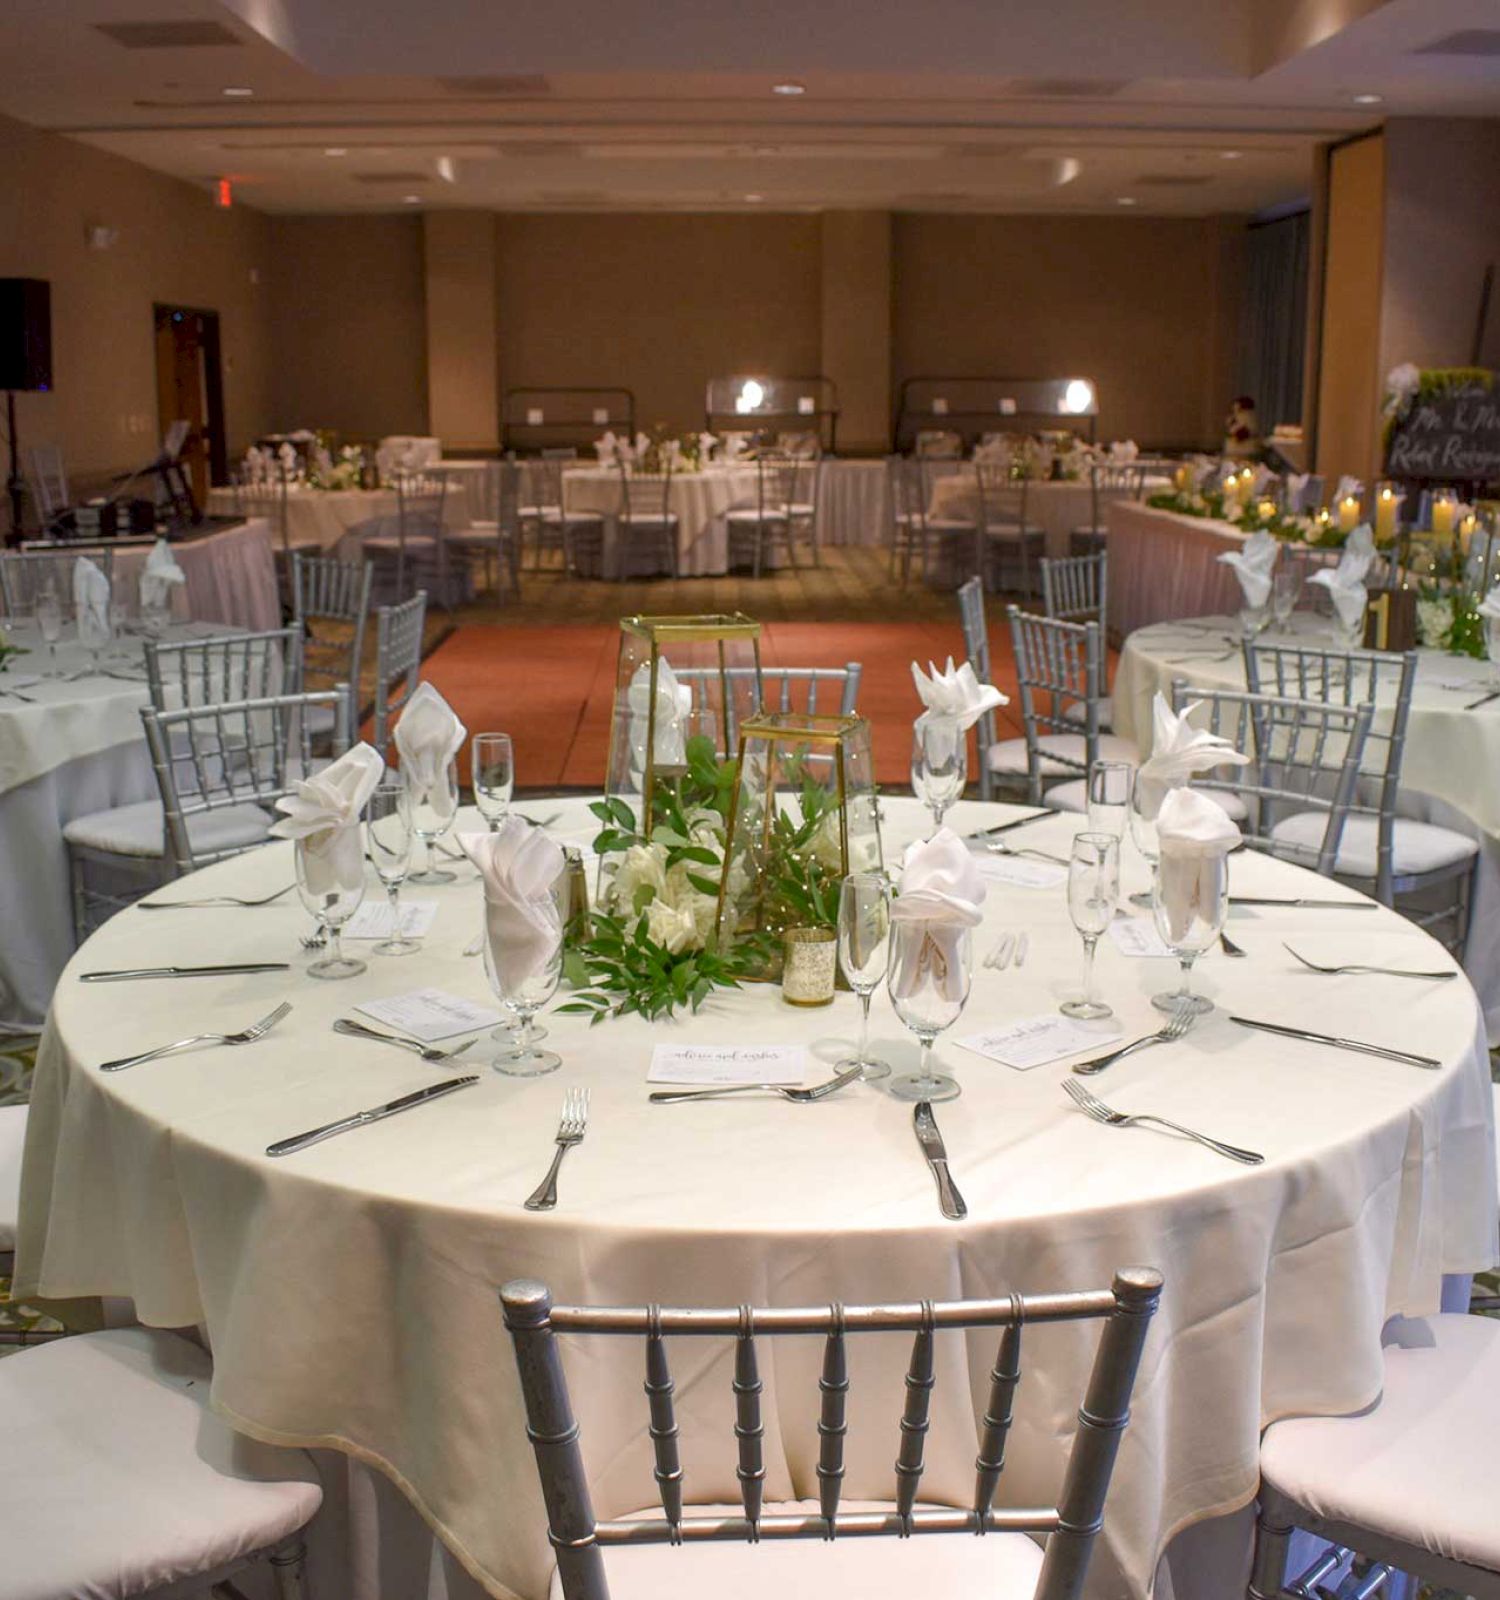 A decorated banquet hall with round tables set with white tablecloths, chairs, glassware, and floral centerpieces, ready for a formal event.